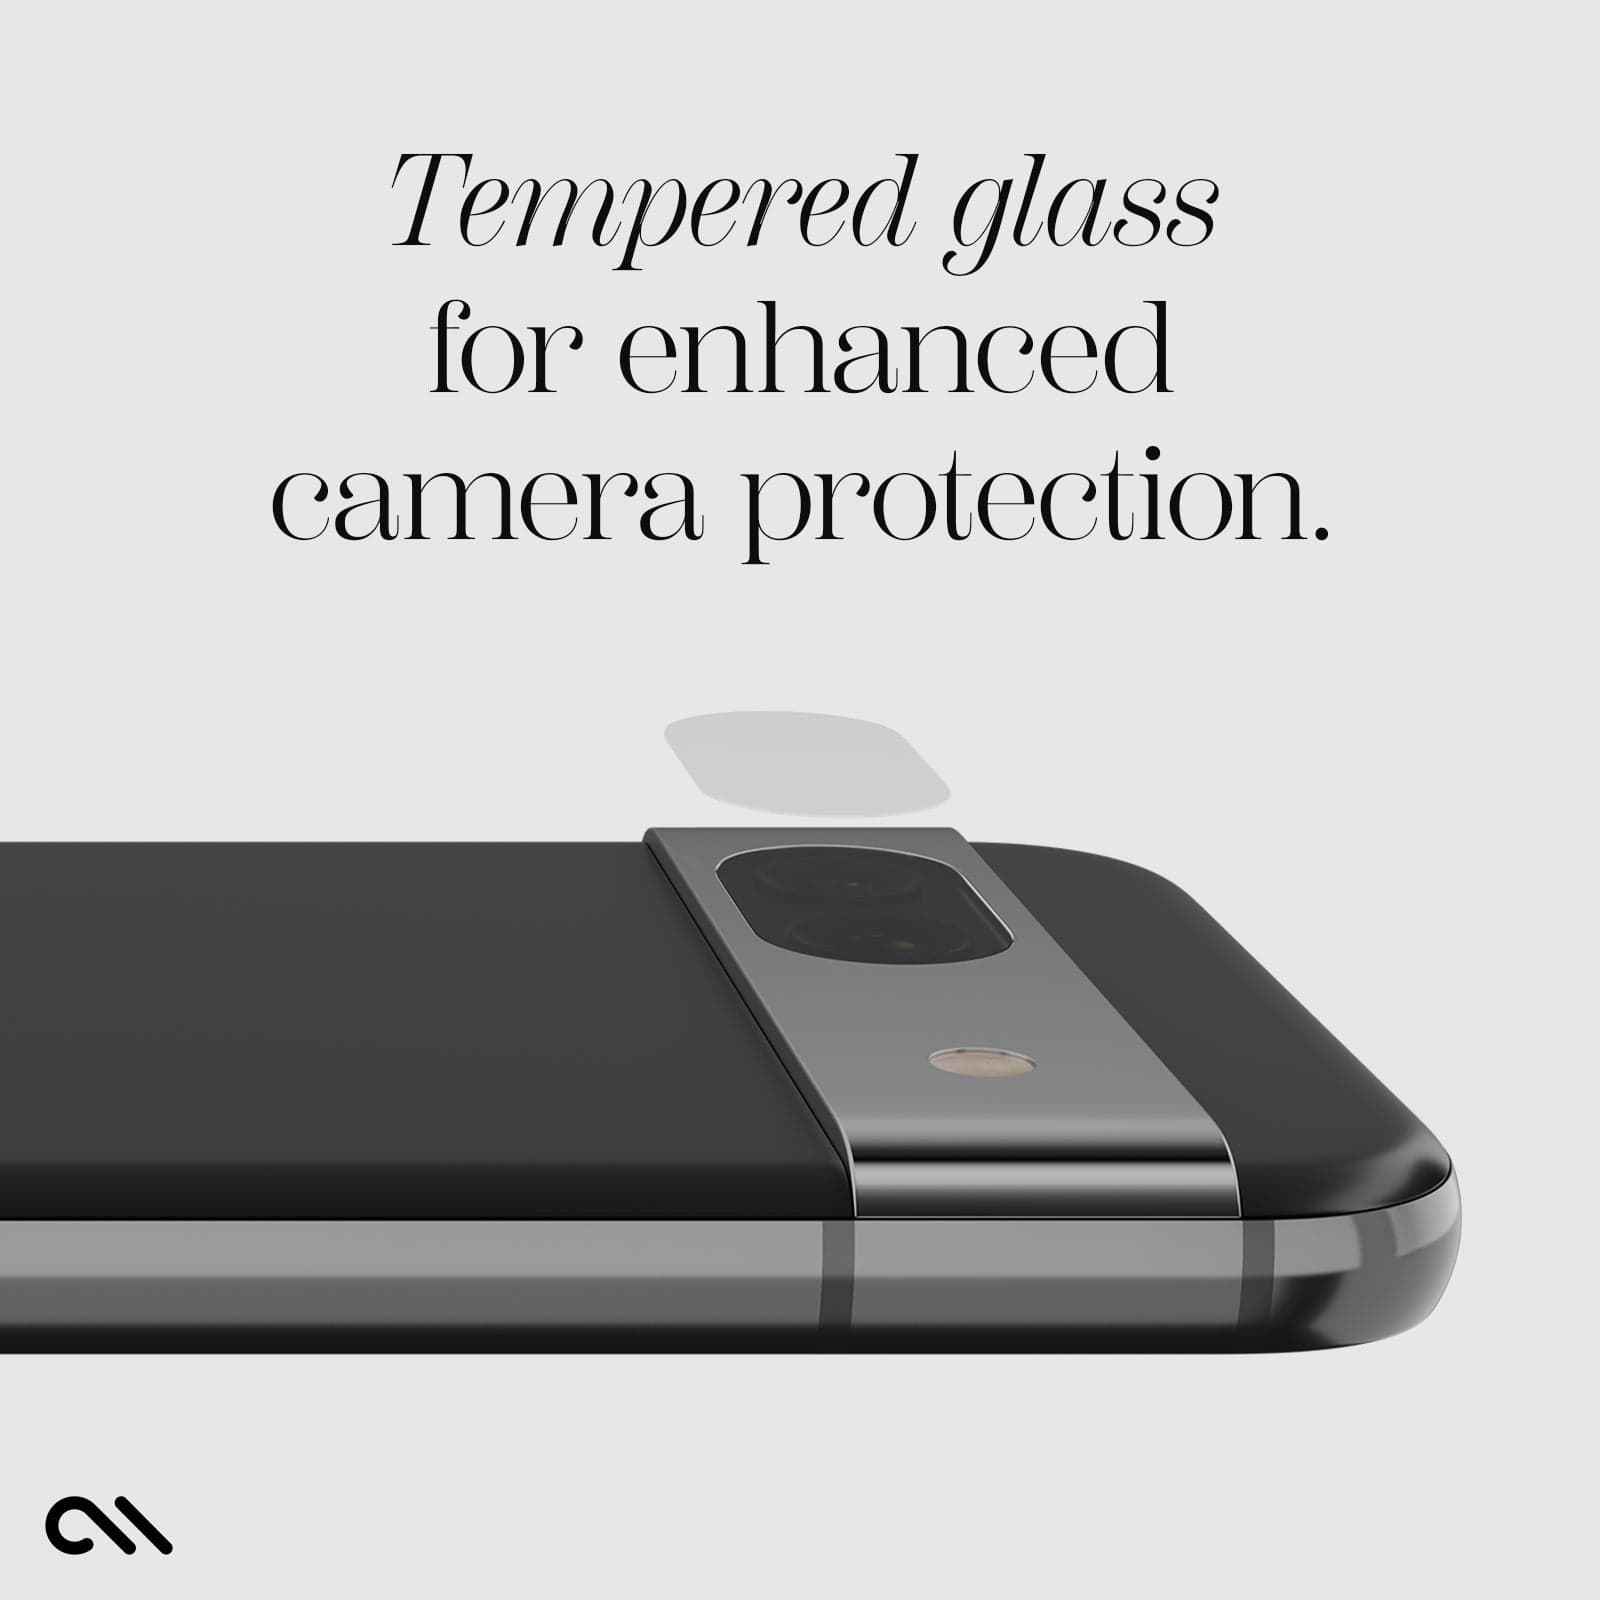 tempered glass for enhanced camera protection